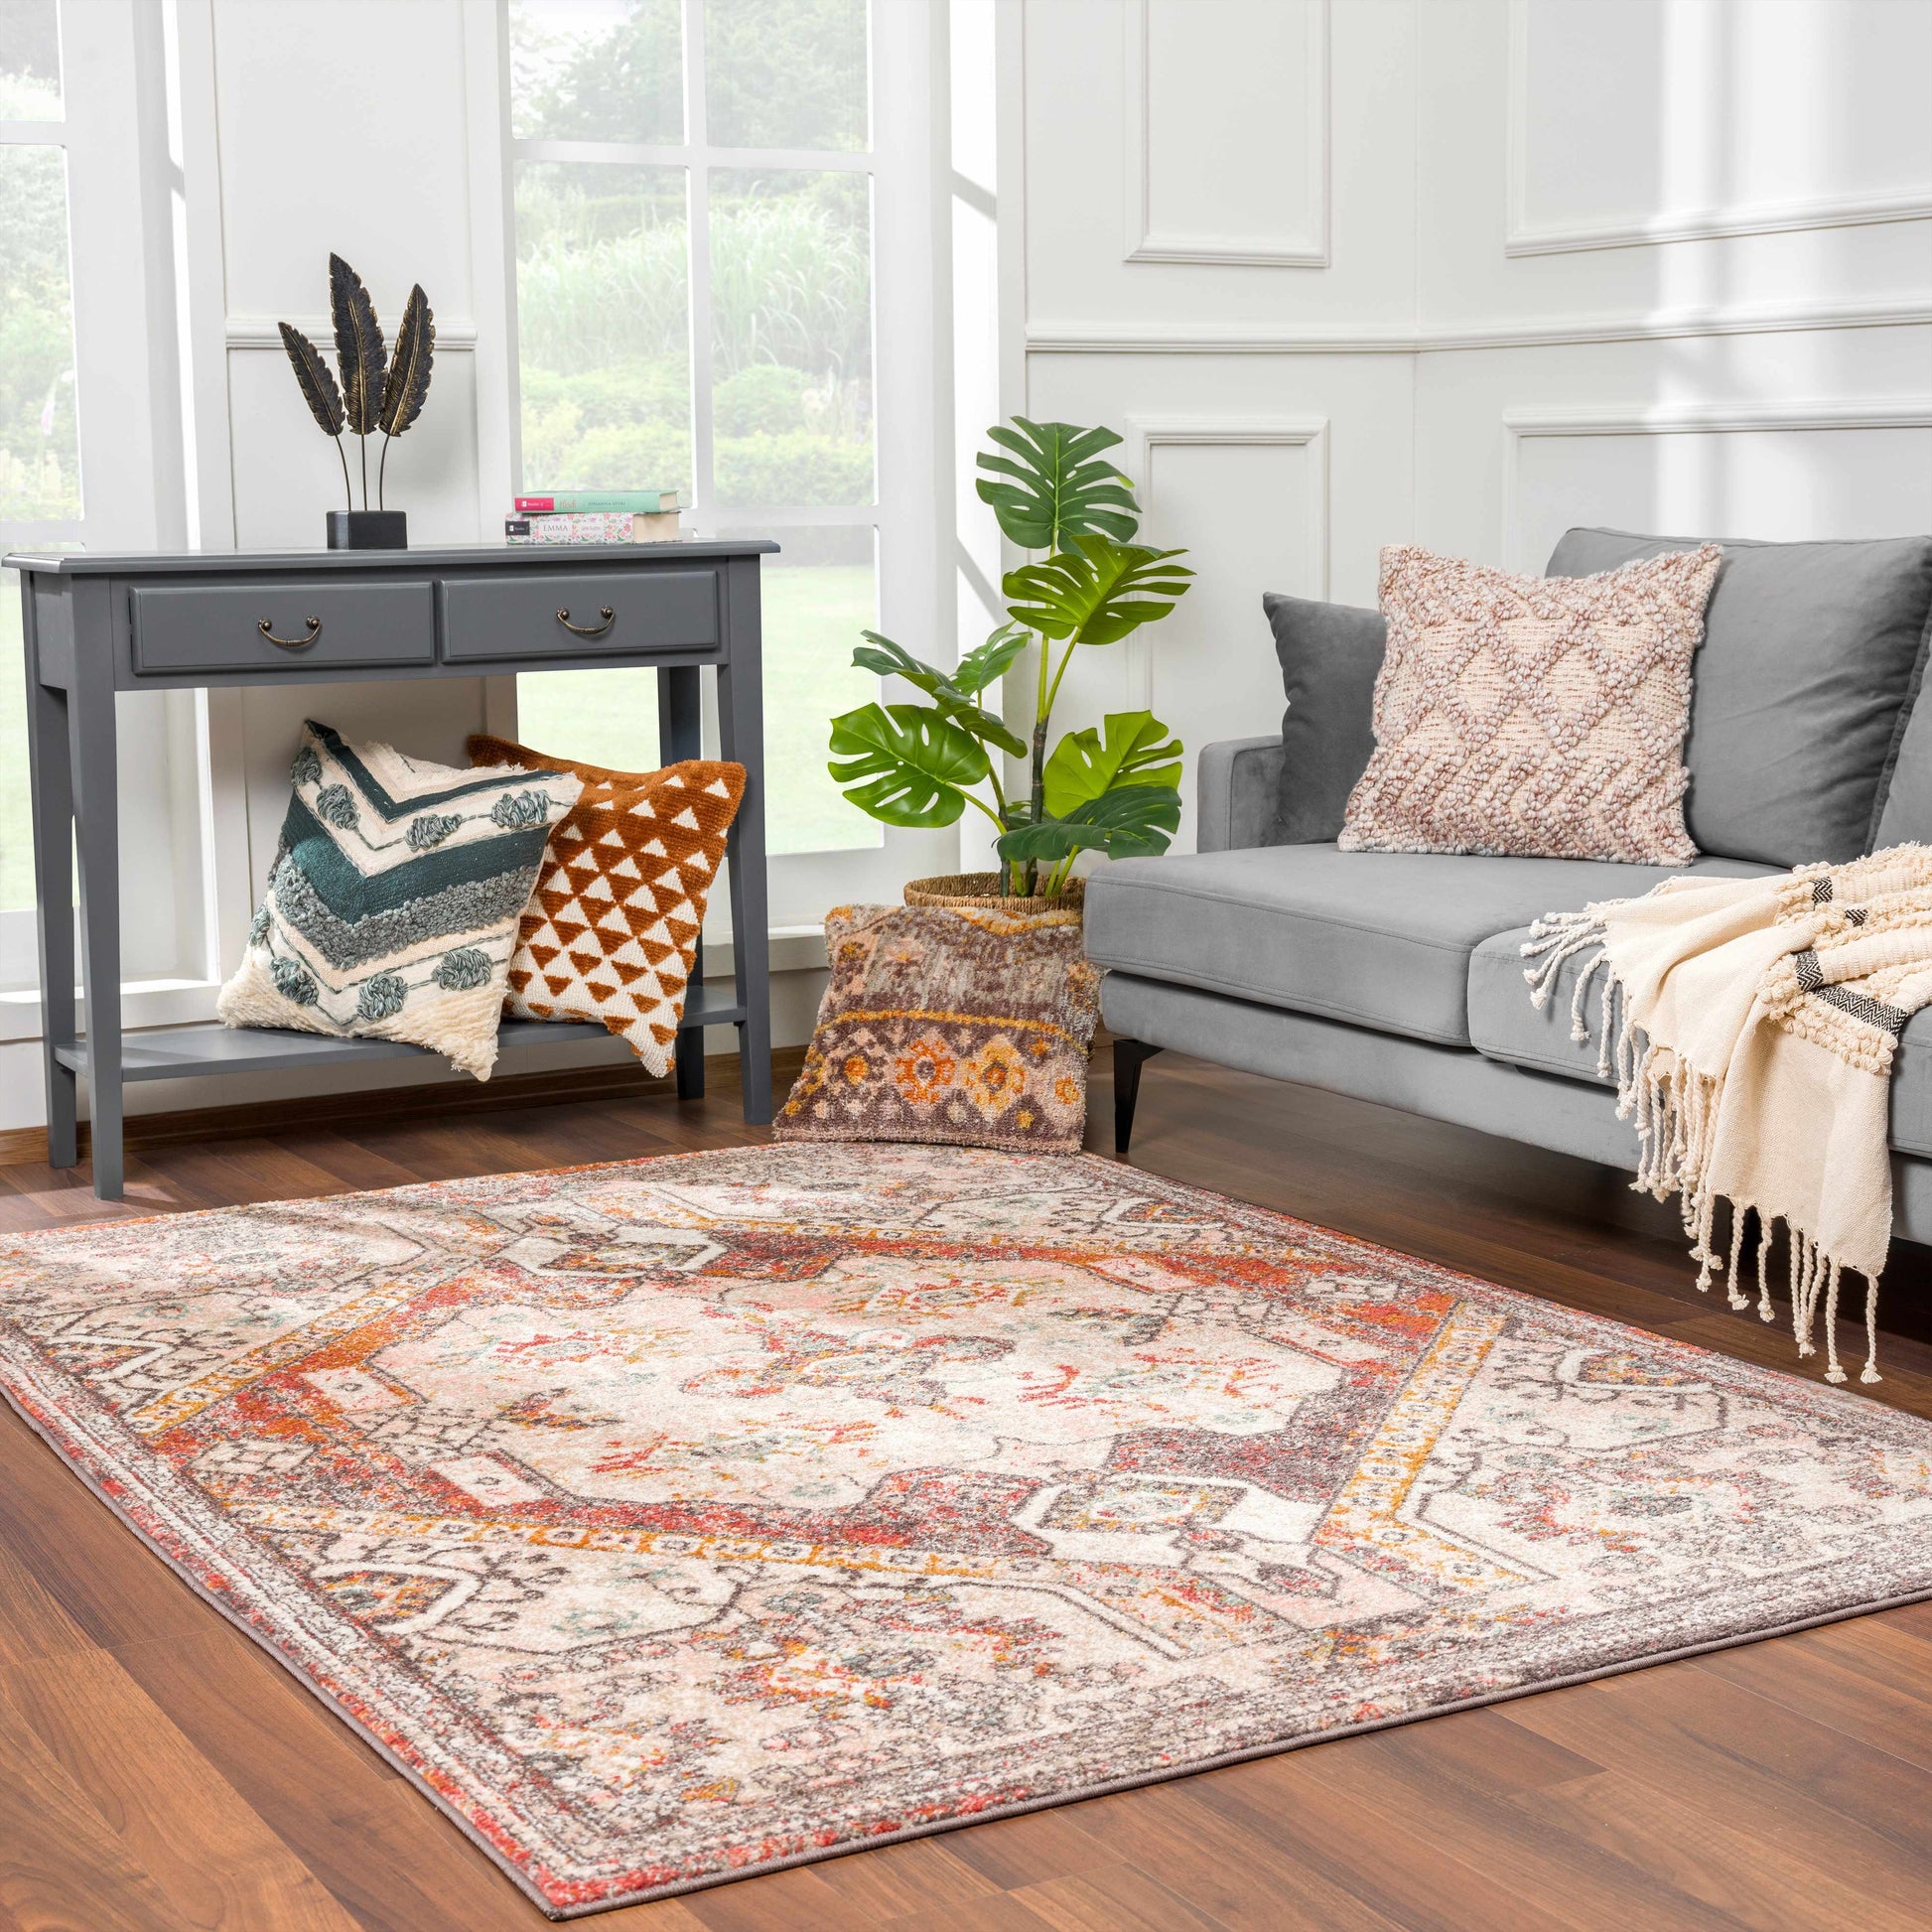 Boutique Rugs Rugs 5'3" x 7'3" Rectangle Yennora Area Rug